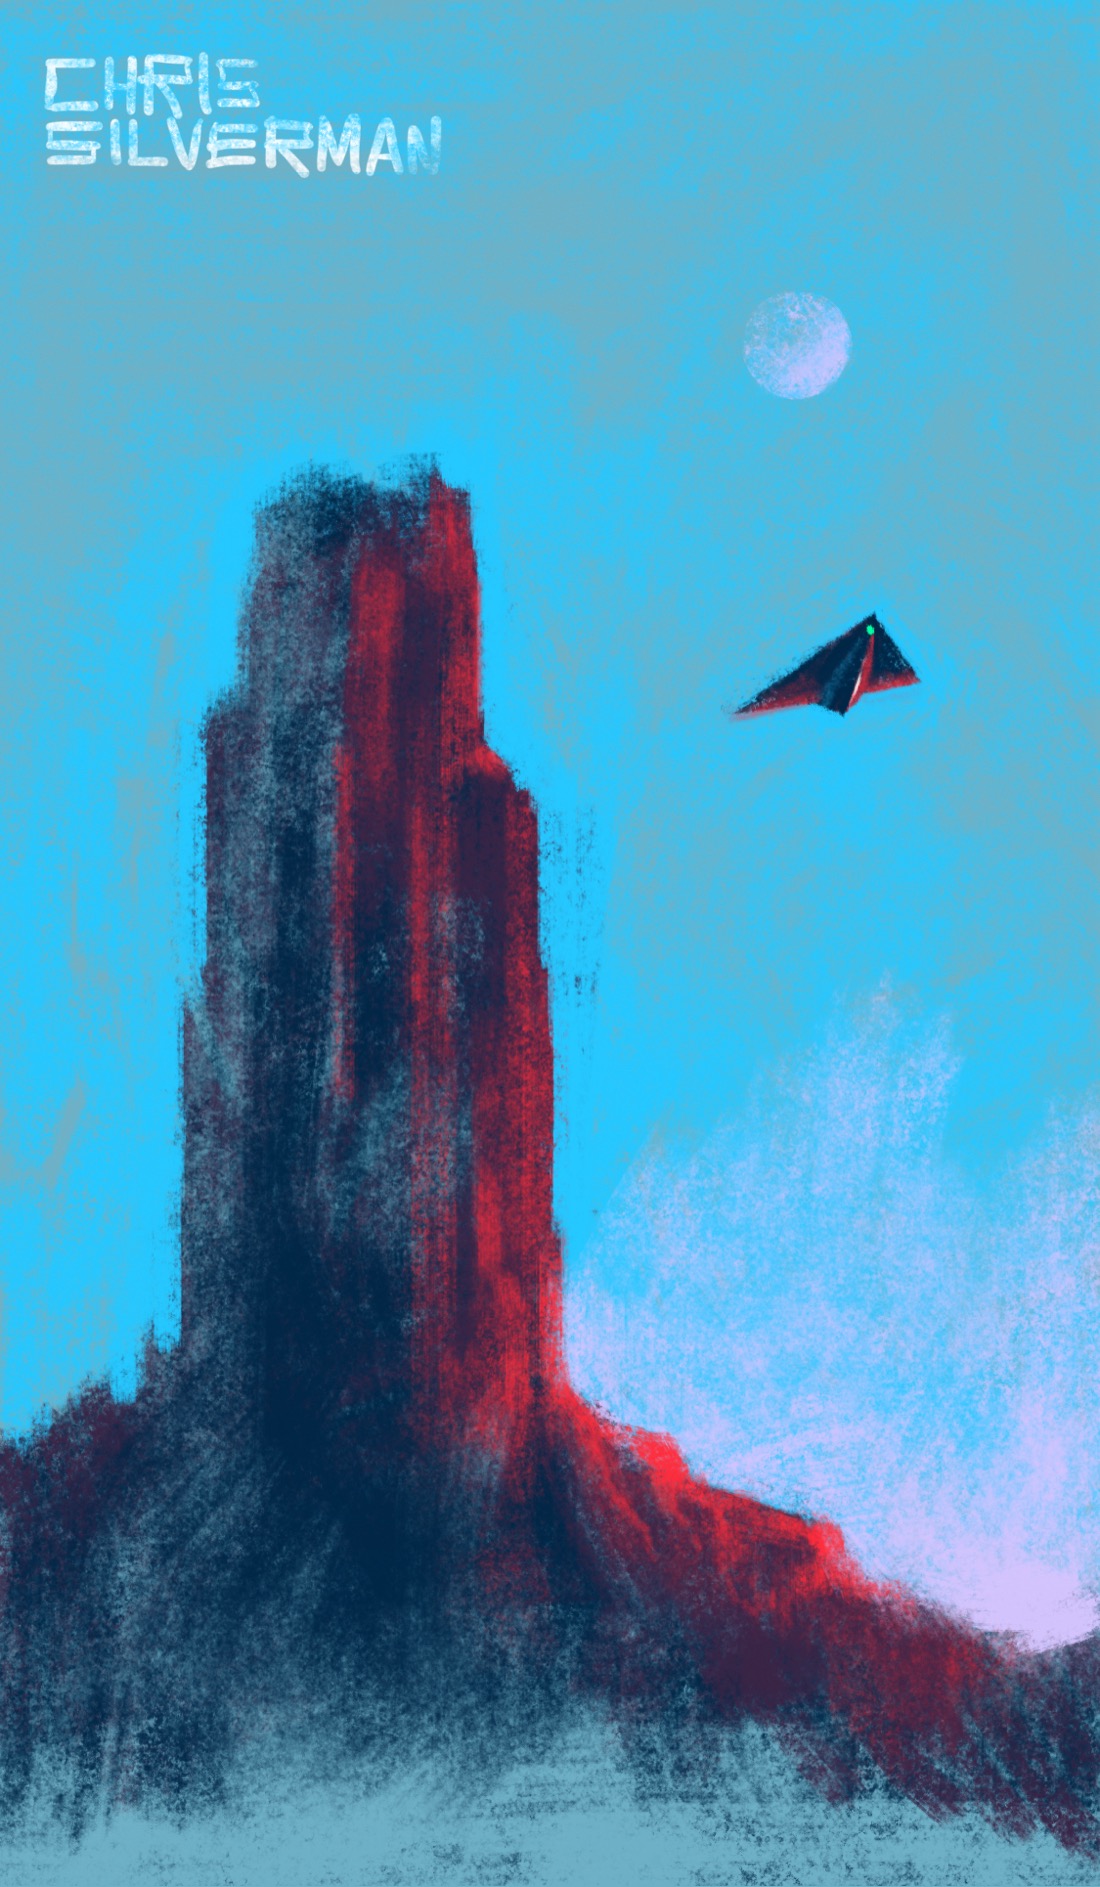 A tower of rock rises up from the desert floor. It's around dusk; the sky is still blue, but the sun is gone. The only remnant of it is a reddish glow on the right side of the tower, and a pink area on the horizon. A pale pink moon sits high in the sky. To the right of the tower, a futuristic triangular aircraft reminiscent of an F-117 Nighthawk cruises past, its underside reddish in the remaining sunlight.